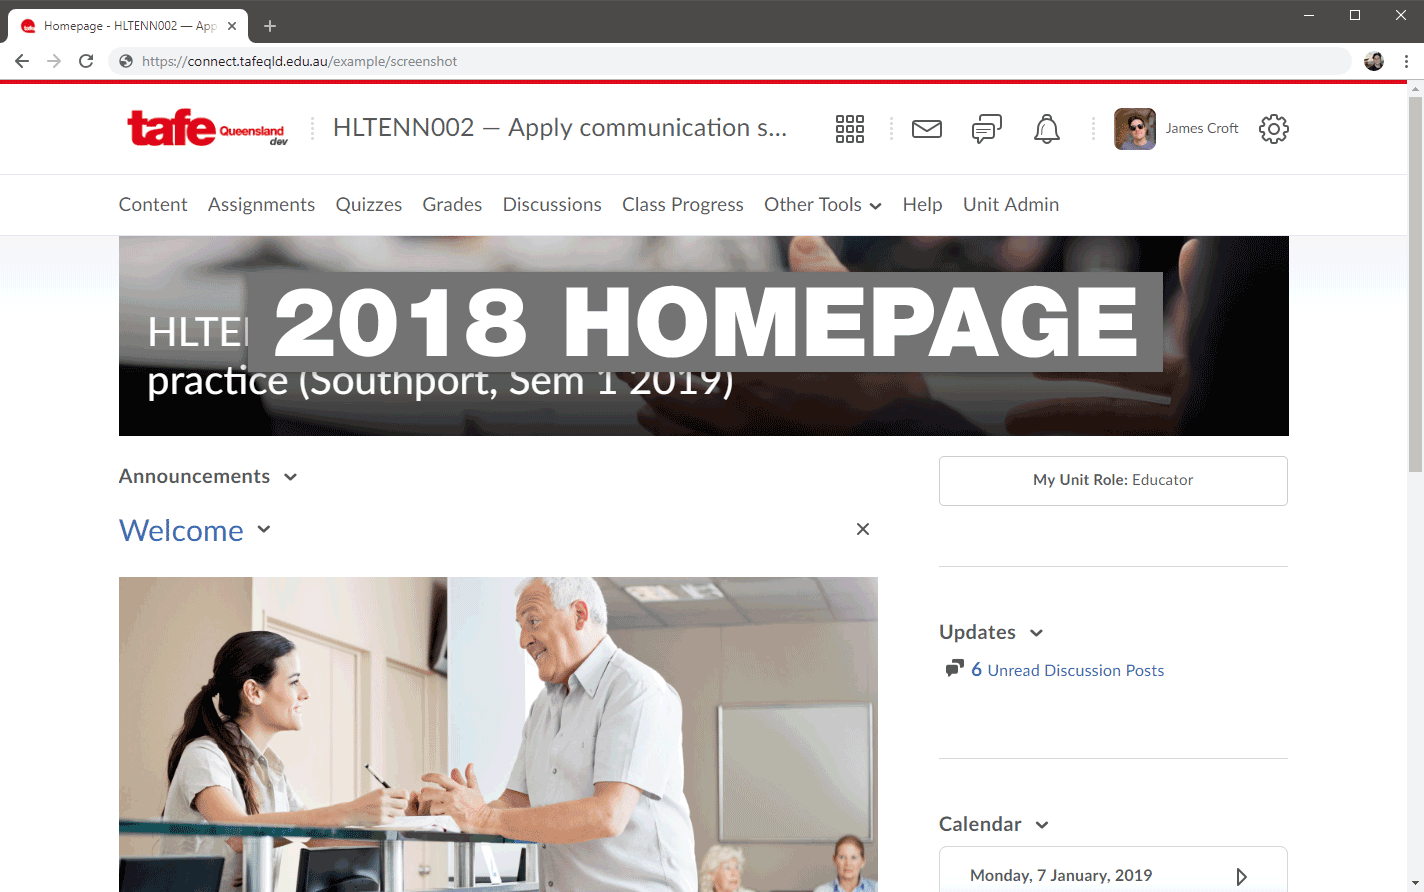 A screenshot of the Connect homepage with the new container-style homepage applied.